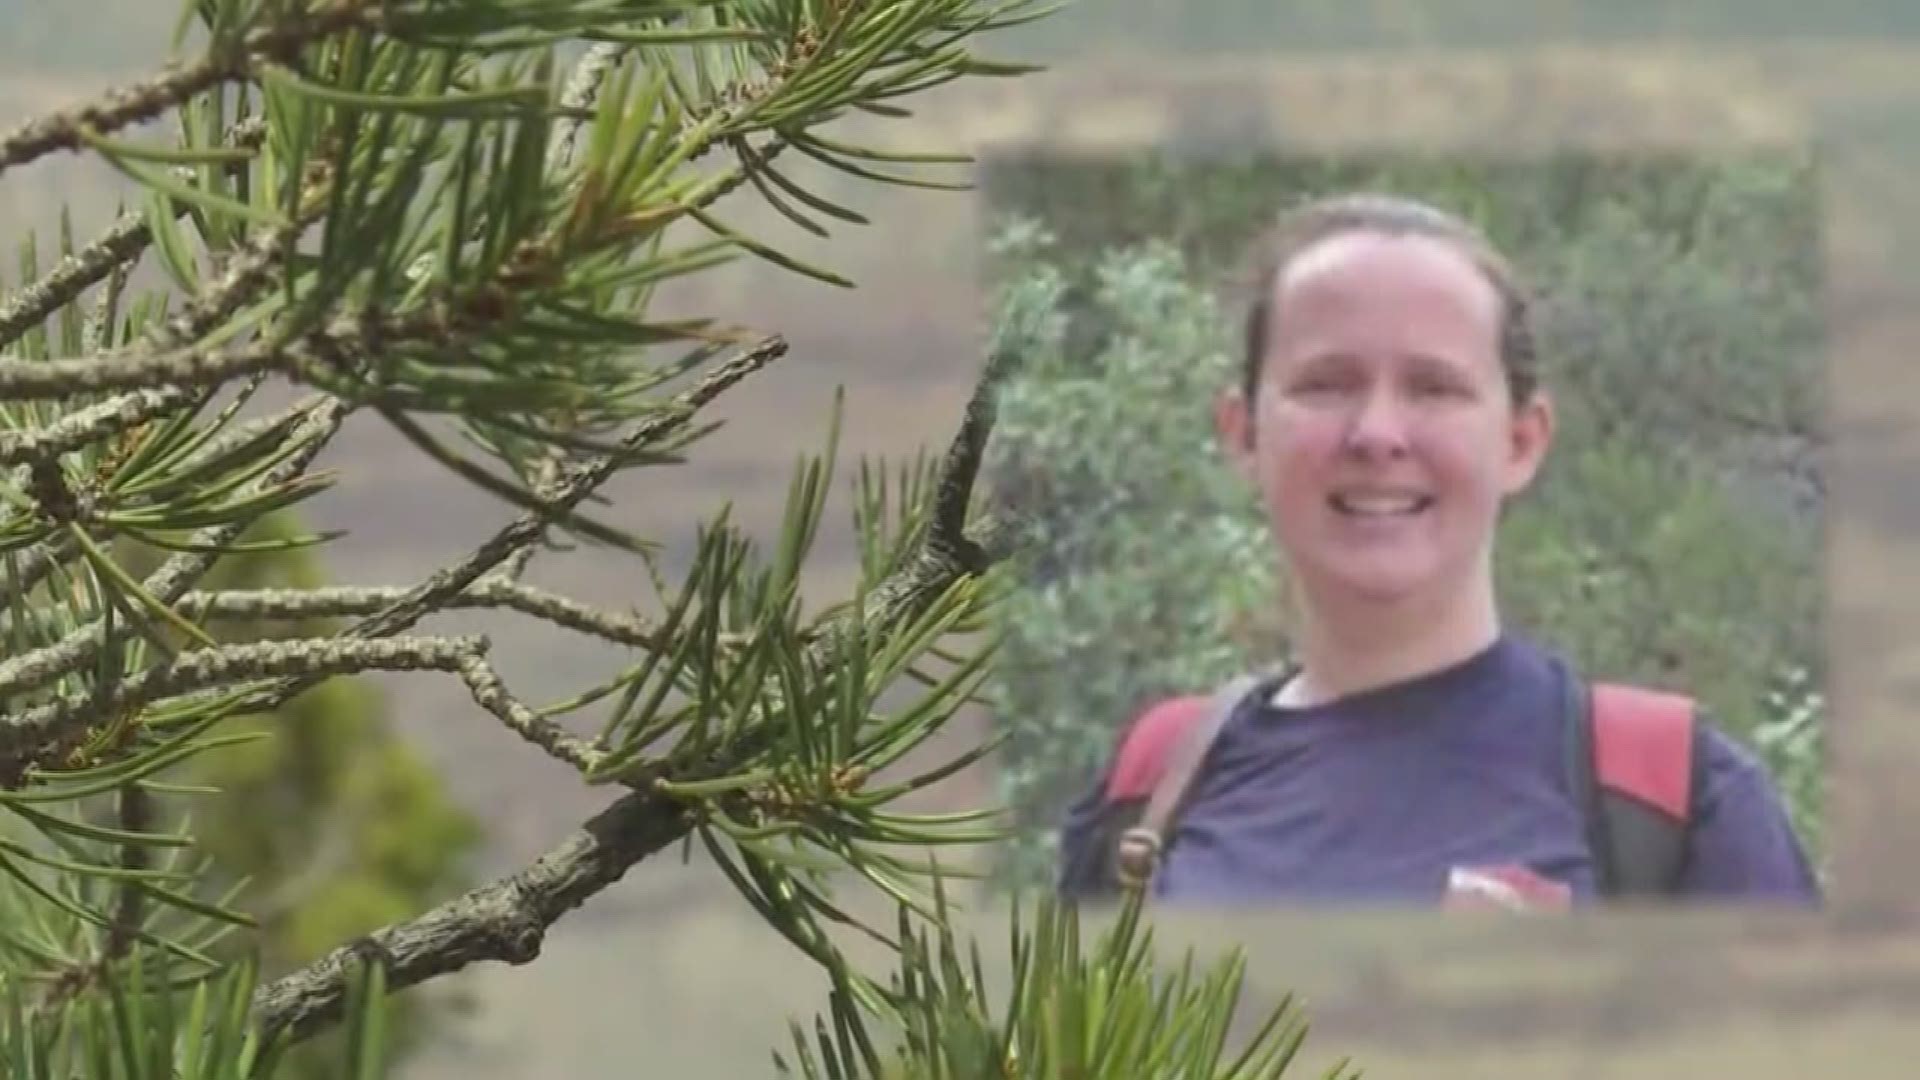 Grand Canyon Park officials say the body of Sarah Beadle was found at the bottom of Grand Canyon.